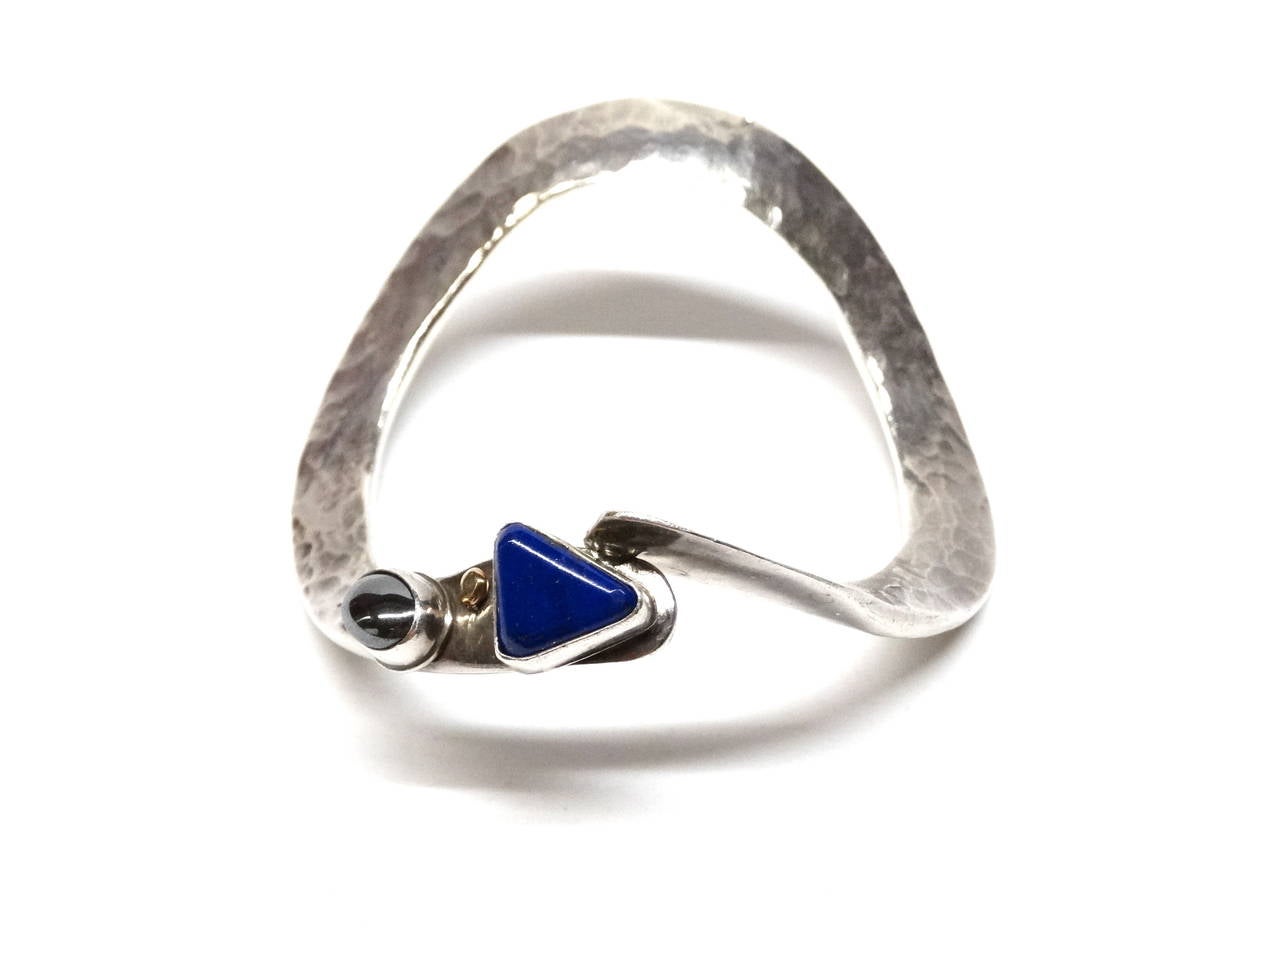 Rare, Beautiful Lapis Bracelet with Hammered -Sterling and 14k gold accents by JOLENE EUSTACE signed JAE- 7